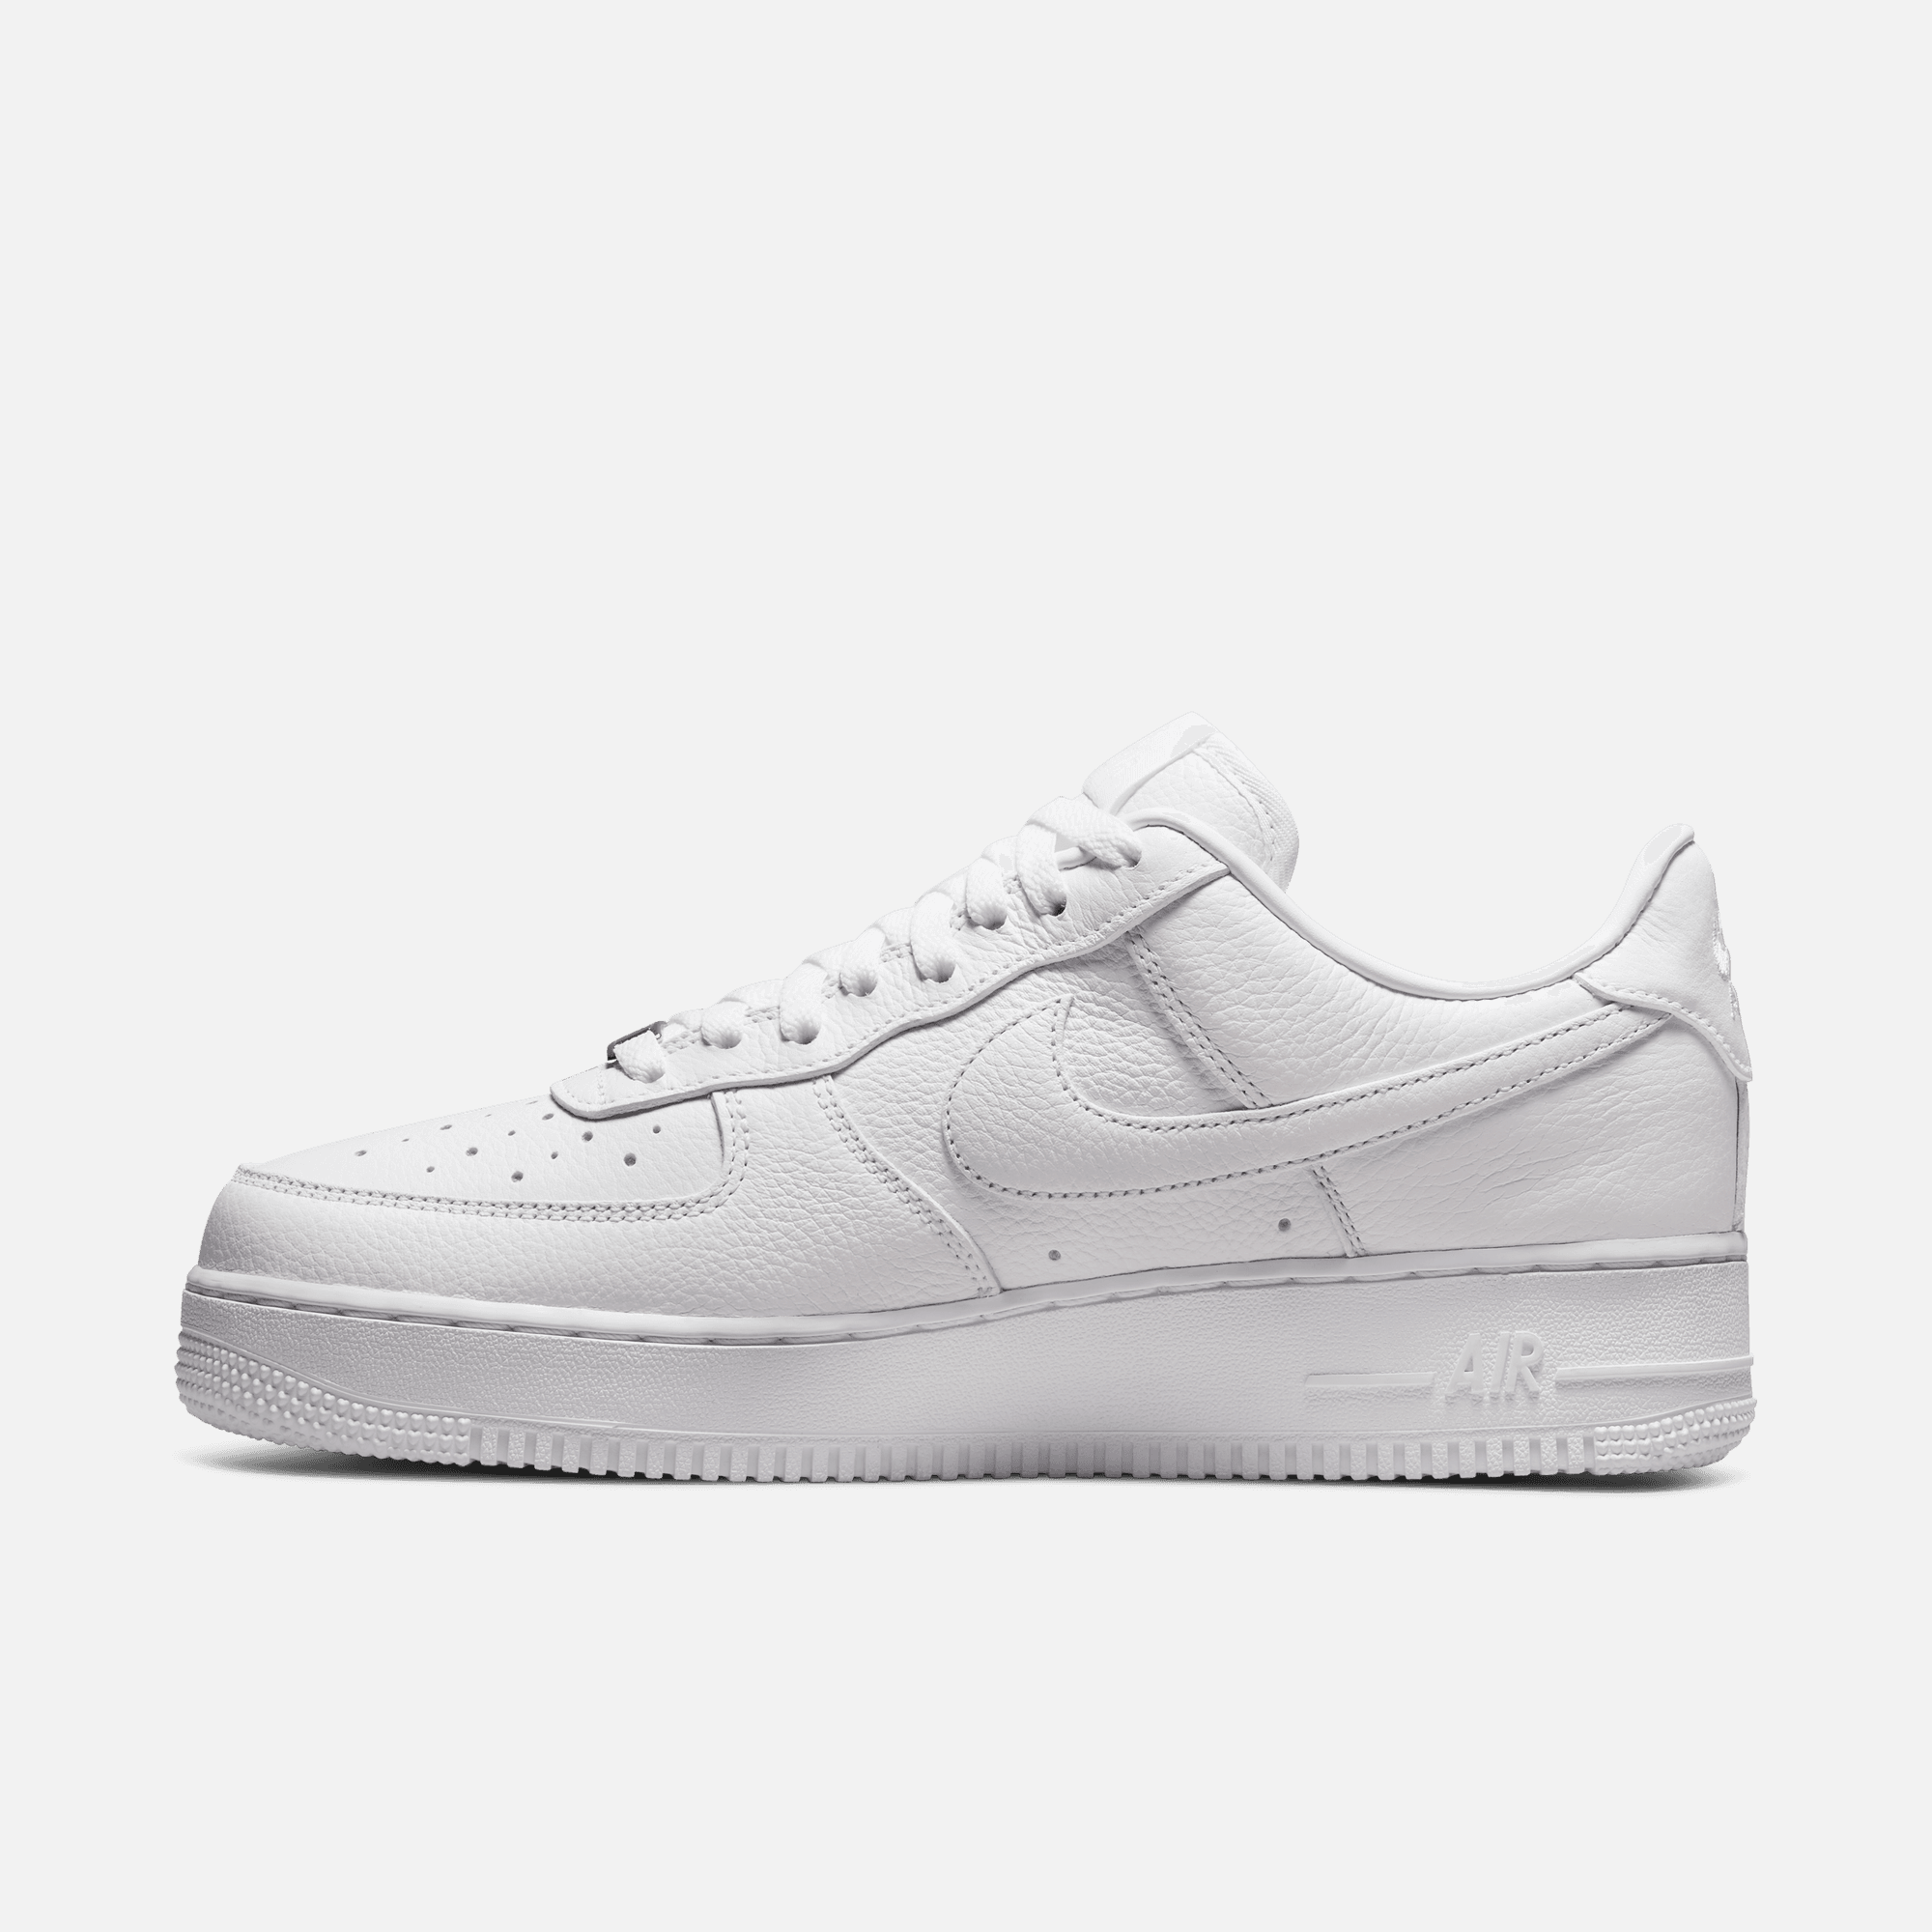 Nike Air Force 1 Low x NOCTA 'Certified Lover Boy'